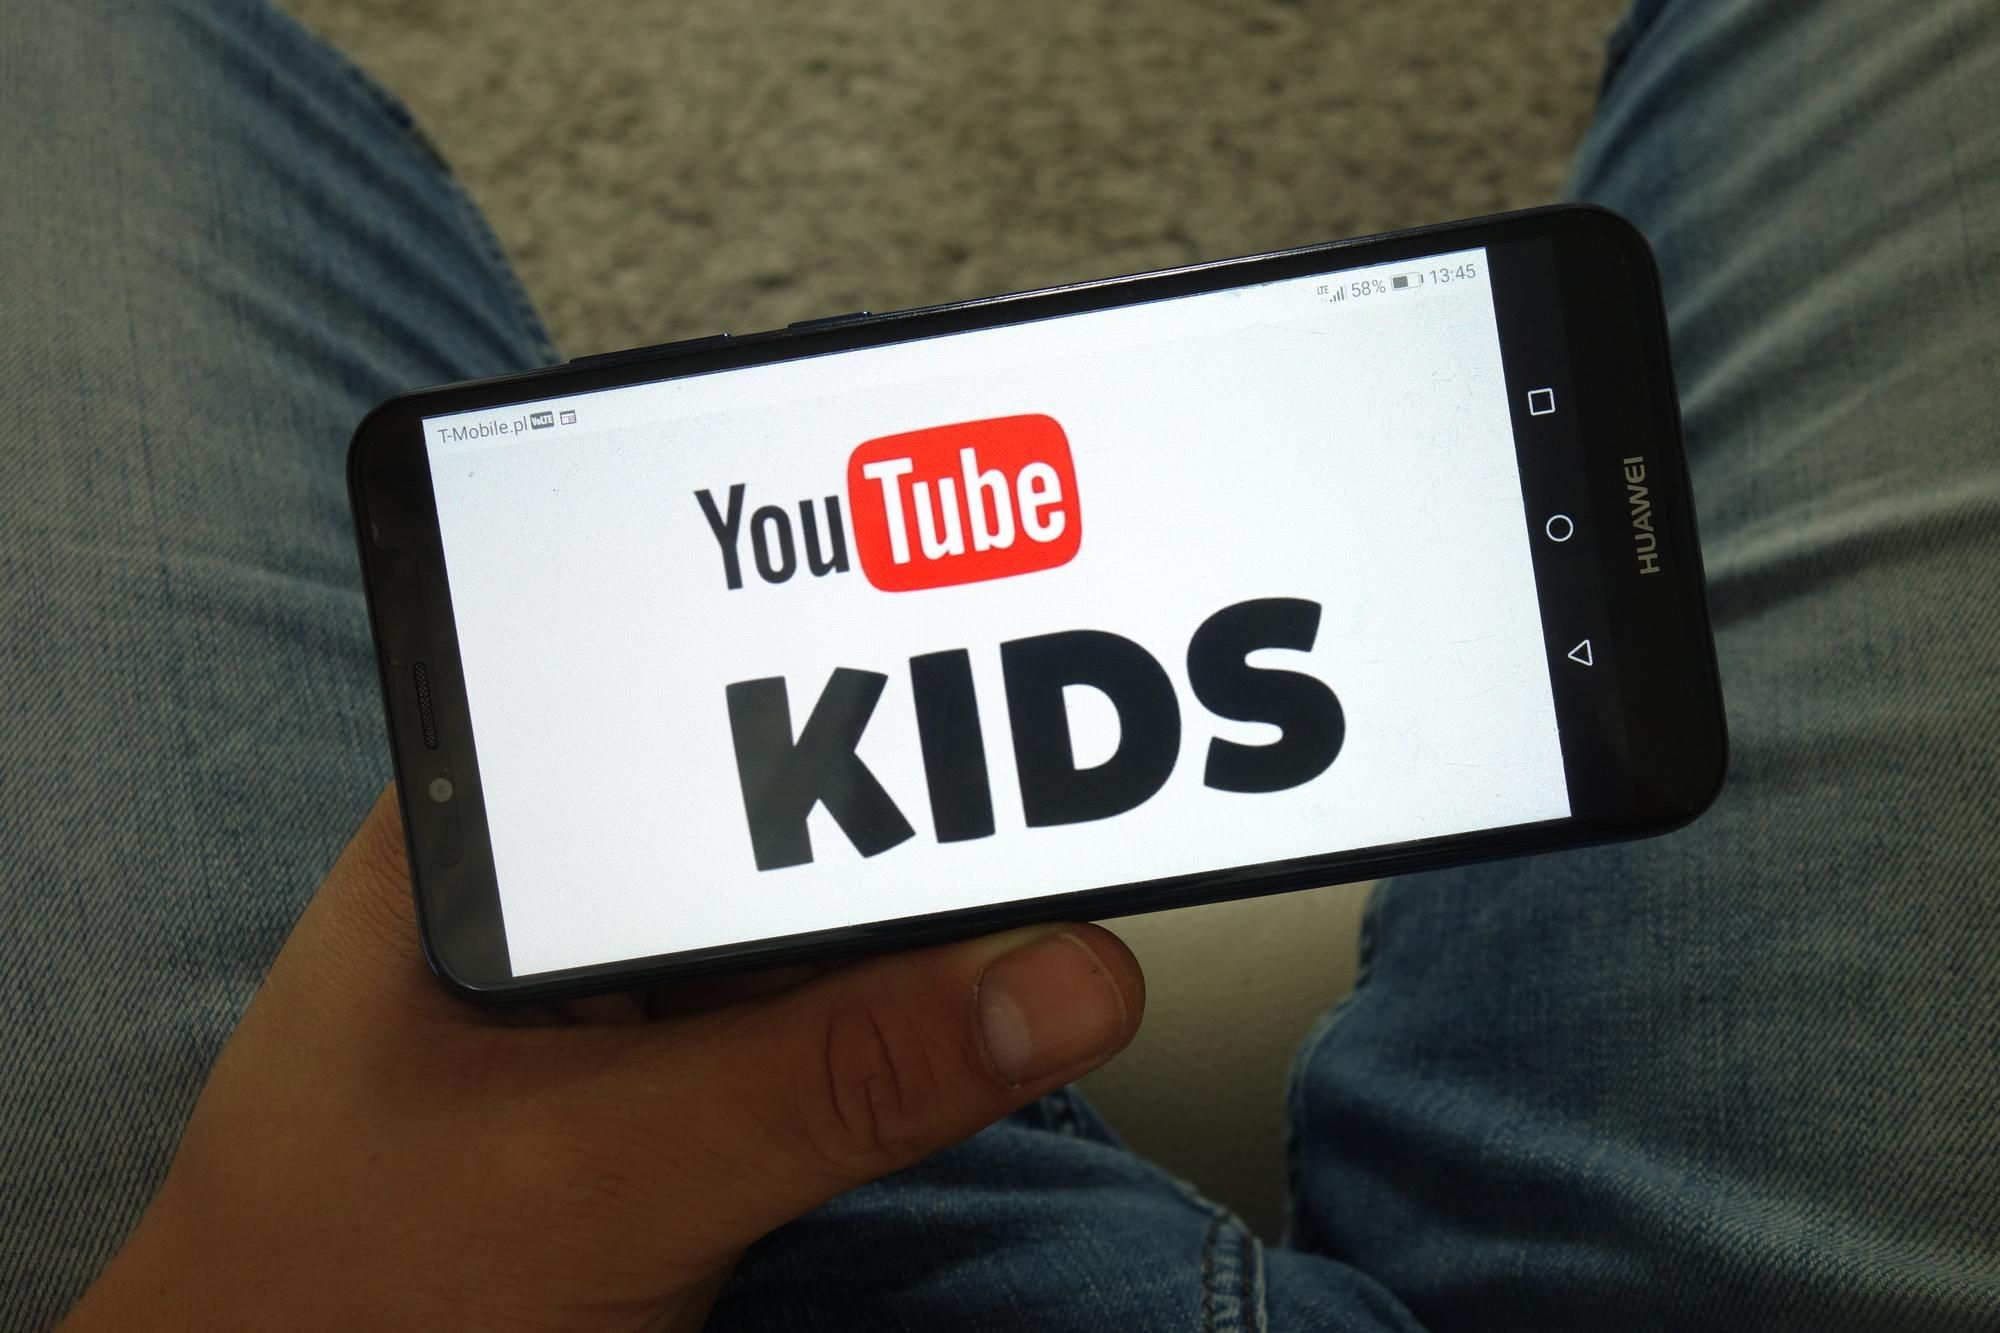 Youtube Kids is being probed into over potential harmful content.